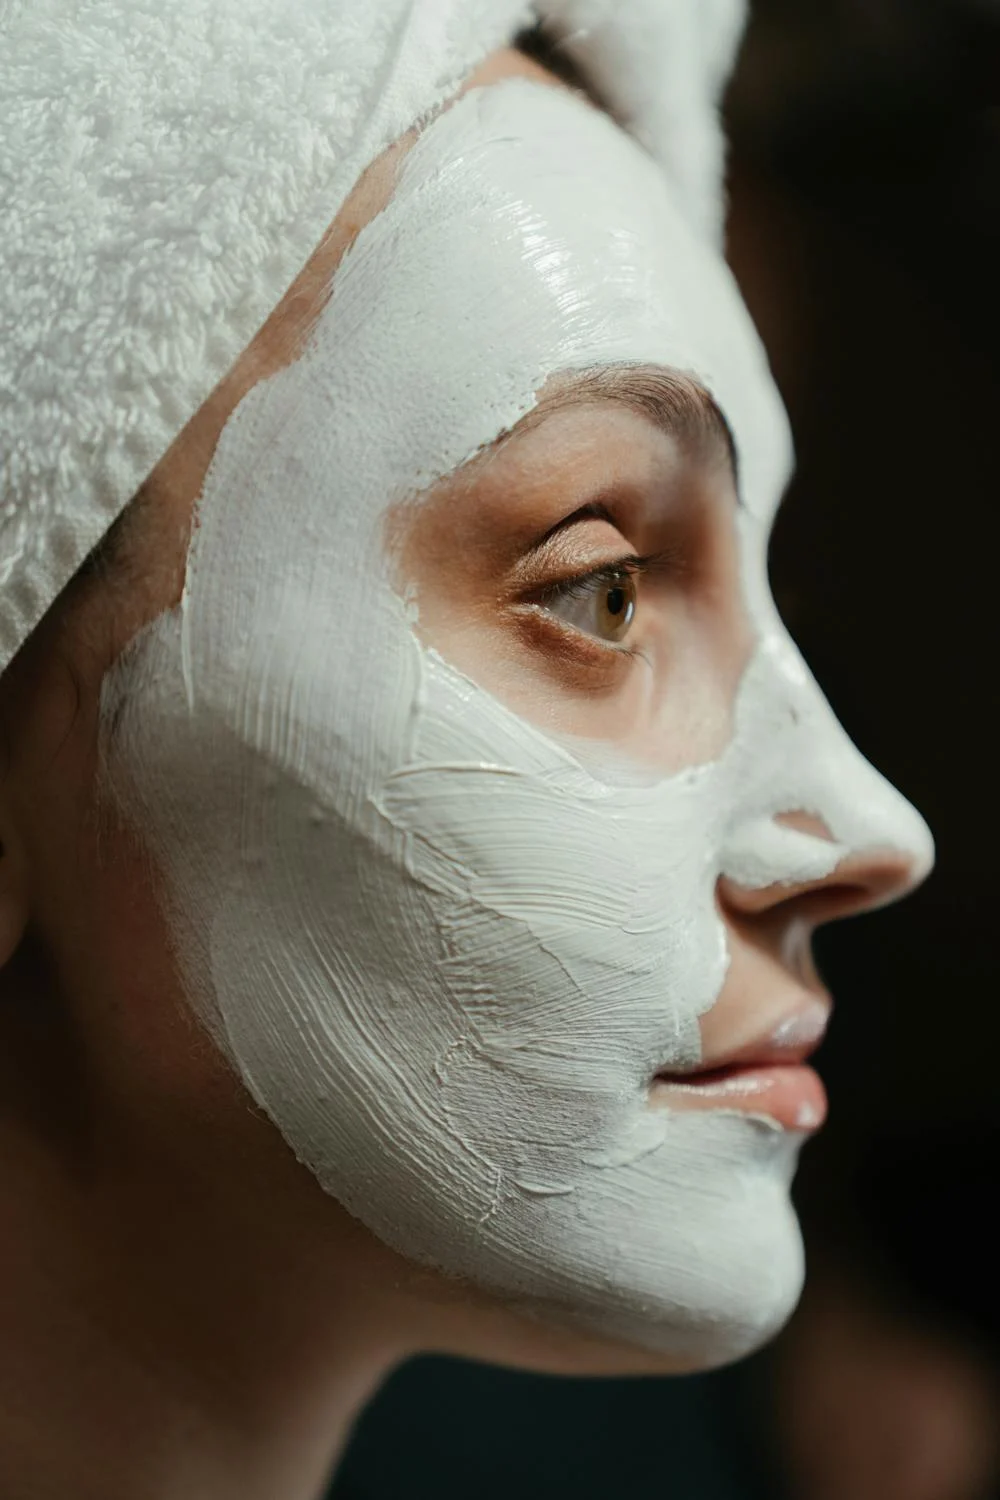 sideview of a woman's face with a face scrub on